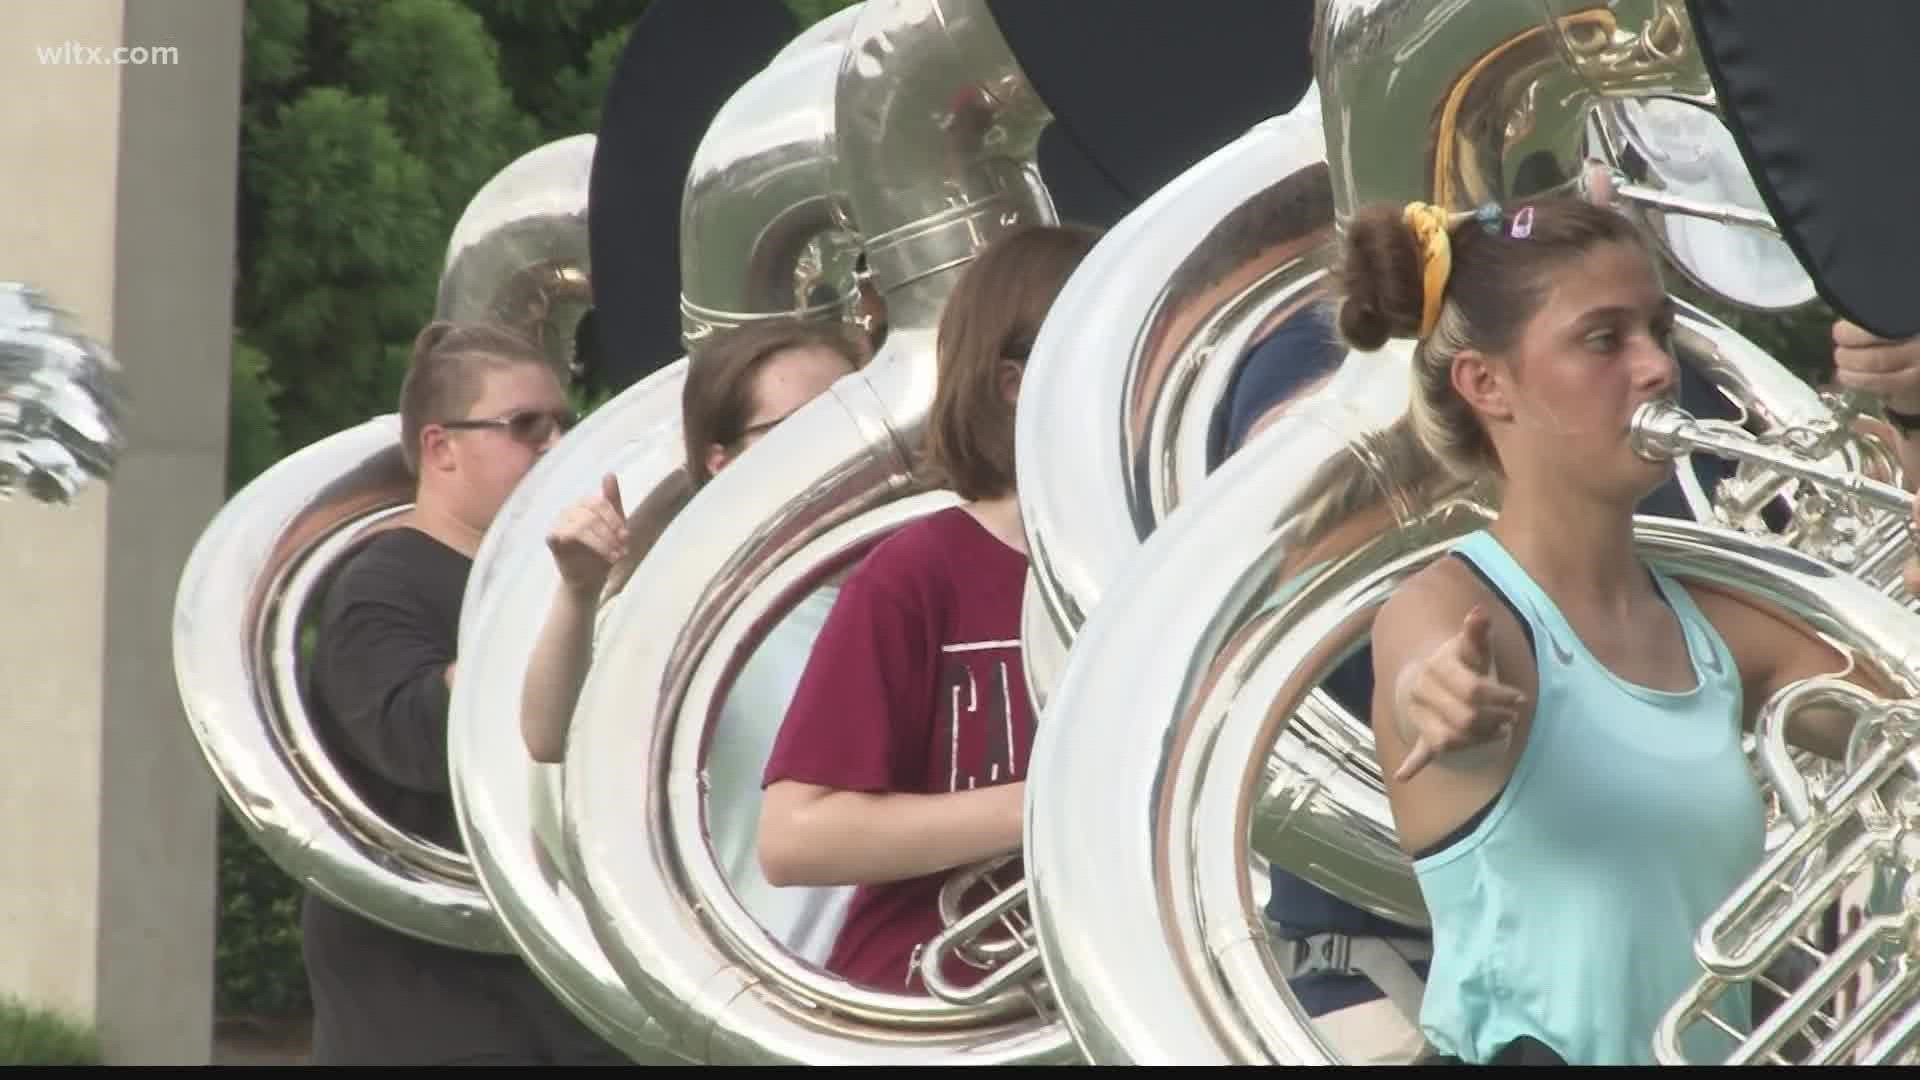 The UofSC band is excited to hit the field for the first game of the season this weekend, last year because of the pandemic, they stayed in the stands.